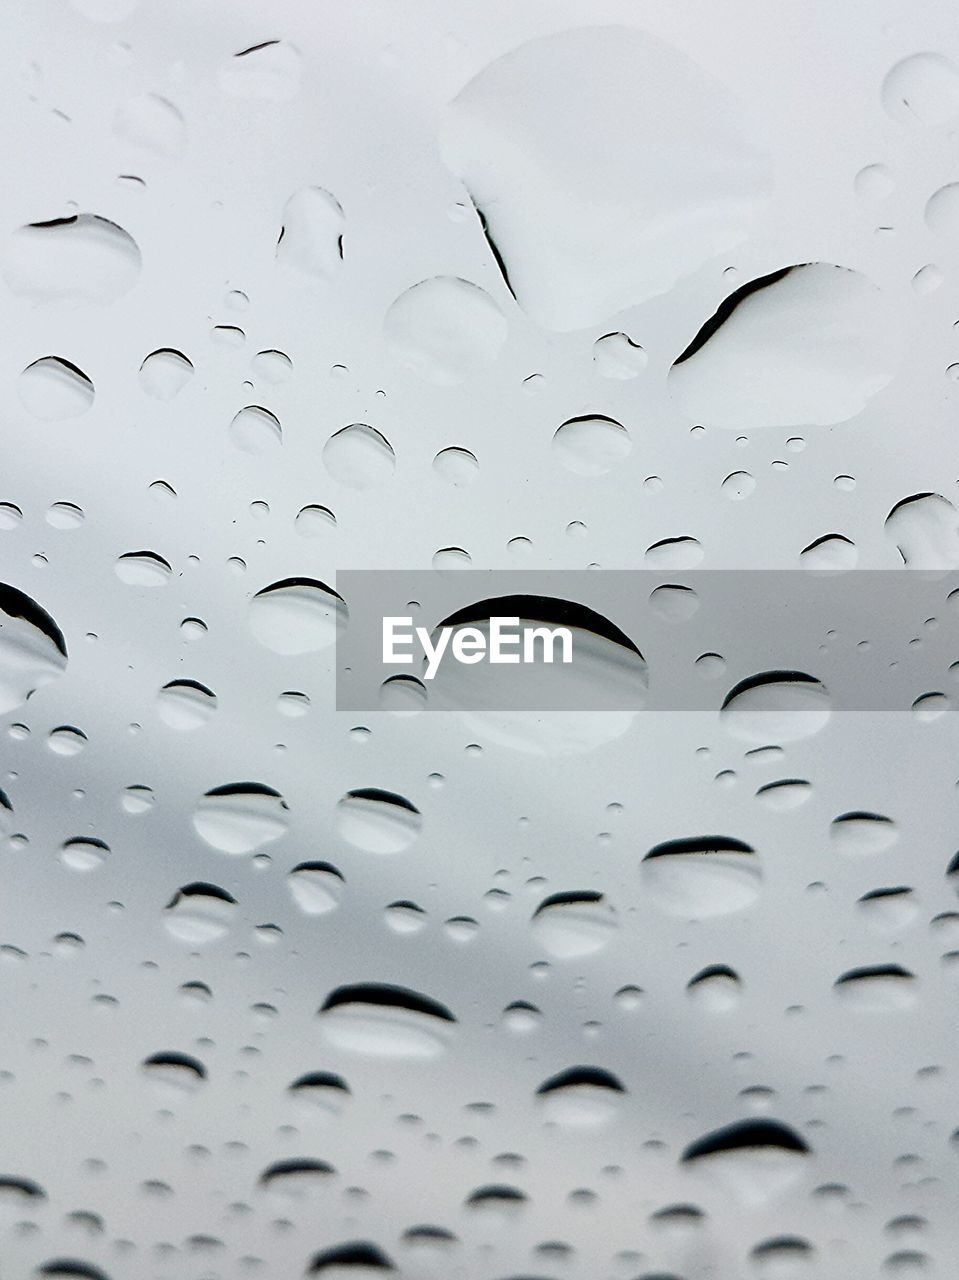 Close-up of waterdrops on glass against the sky